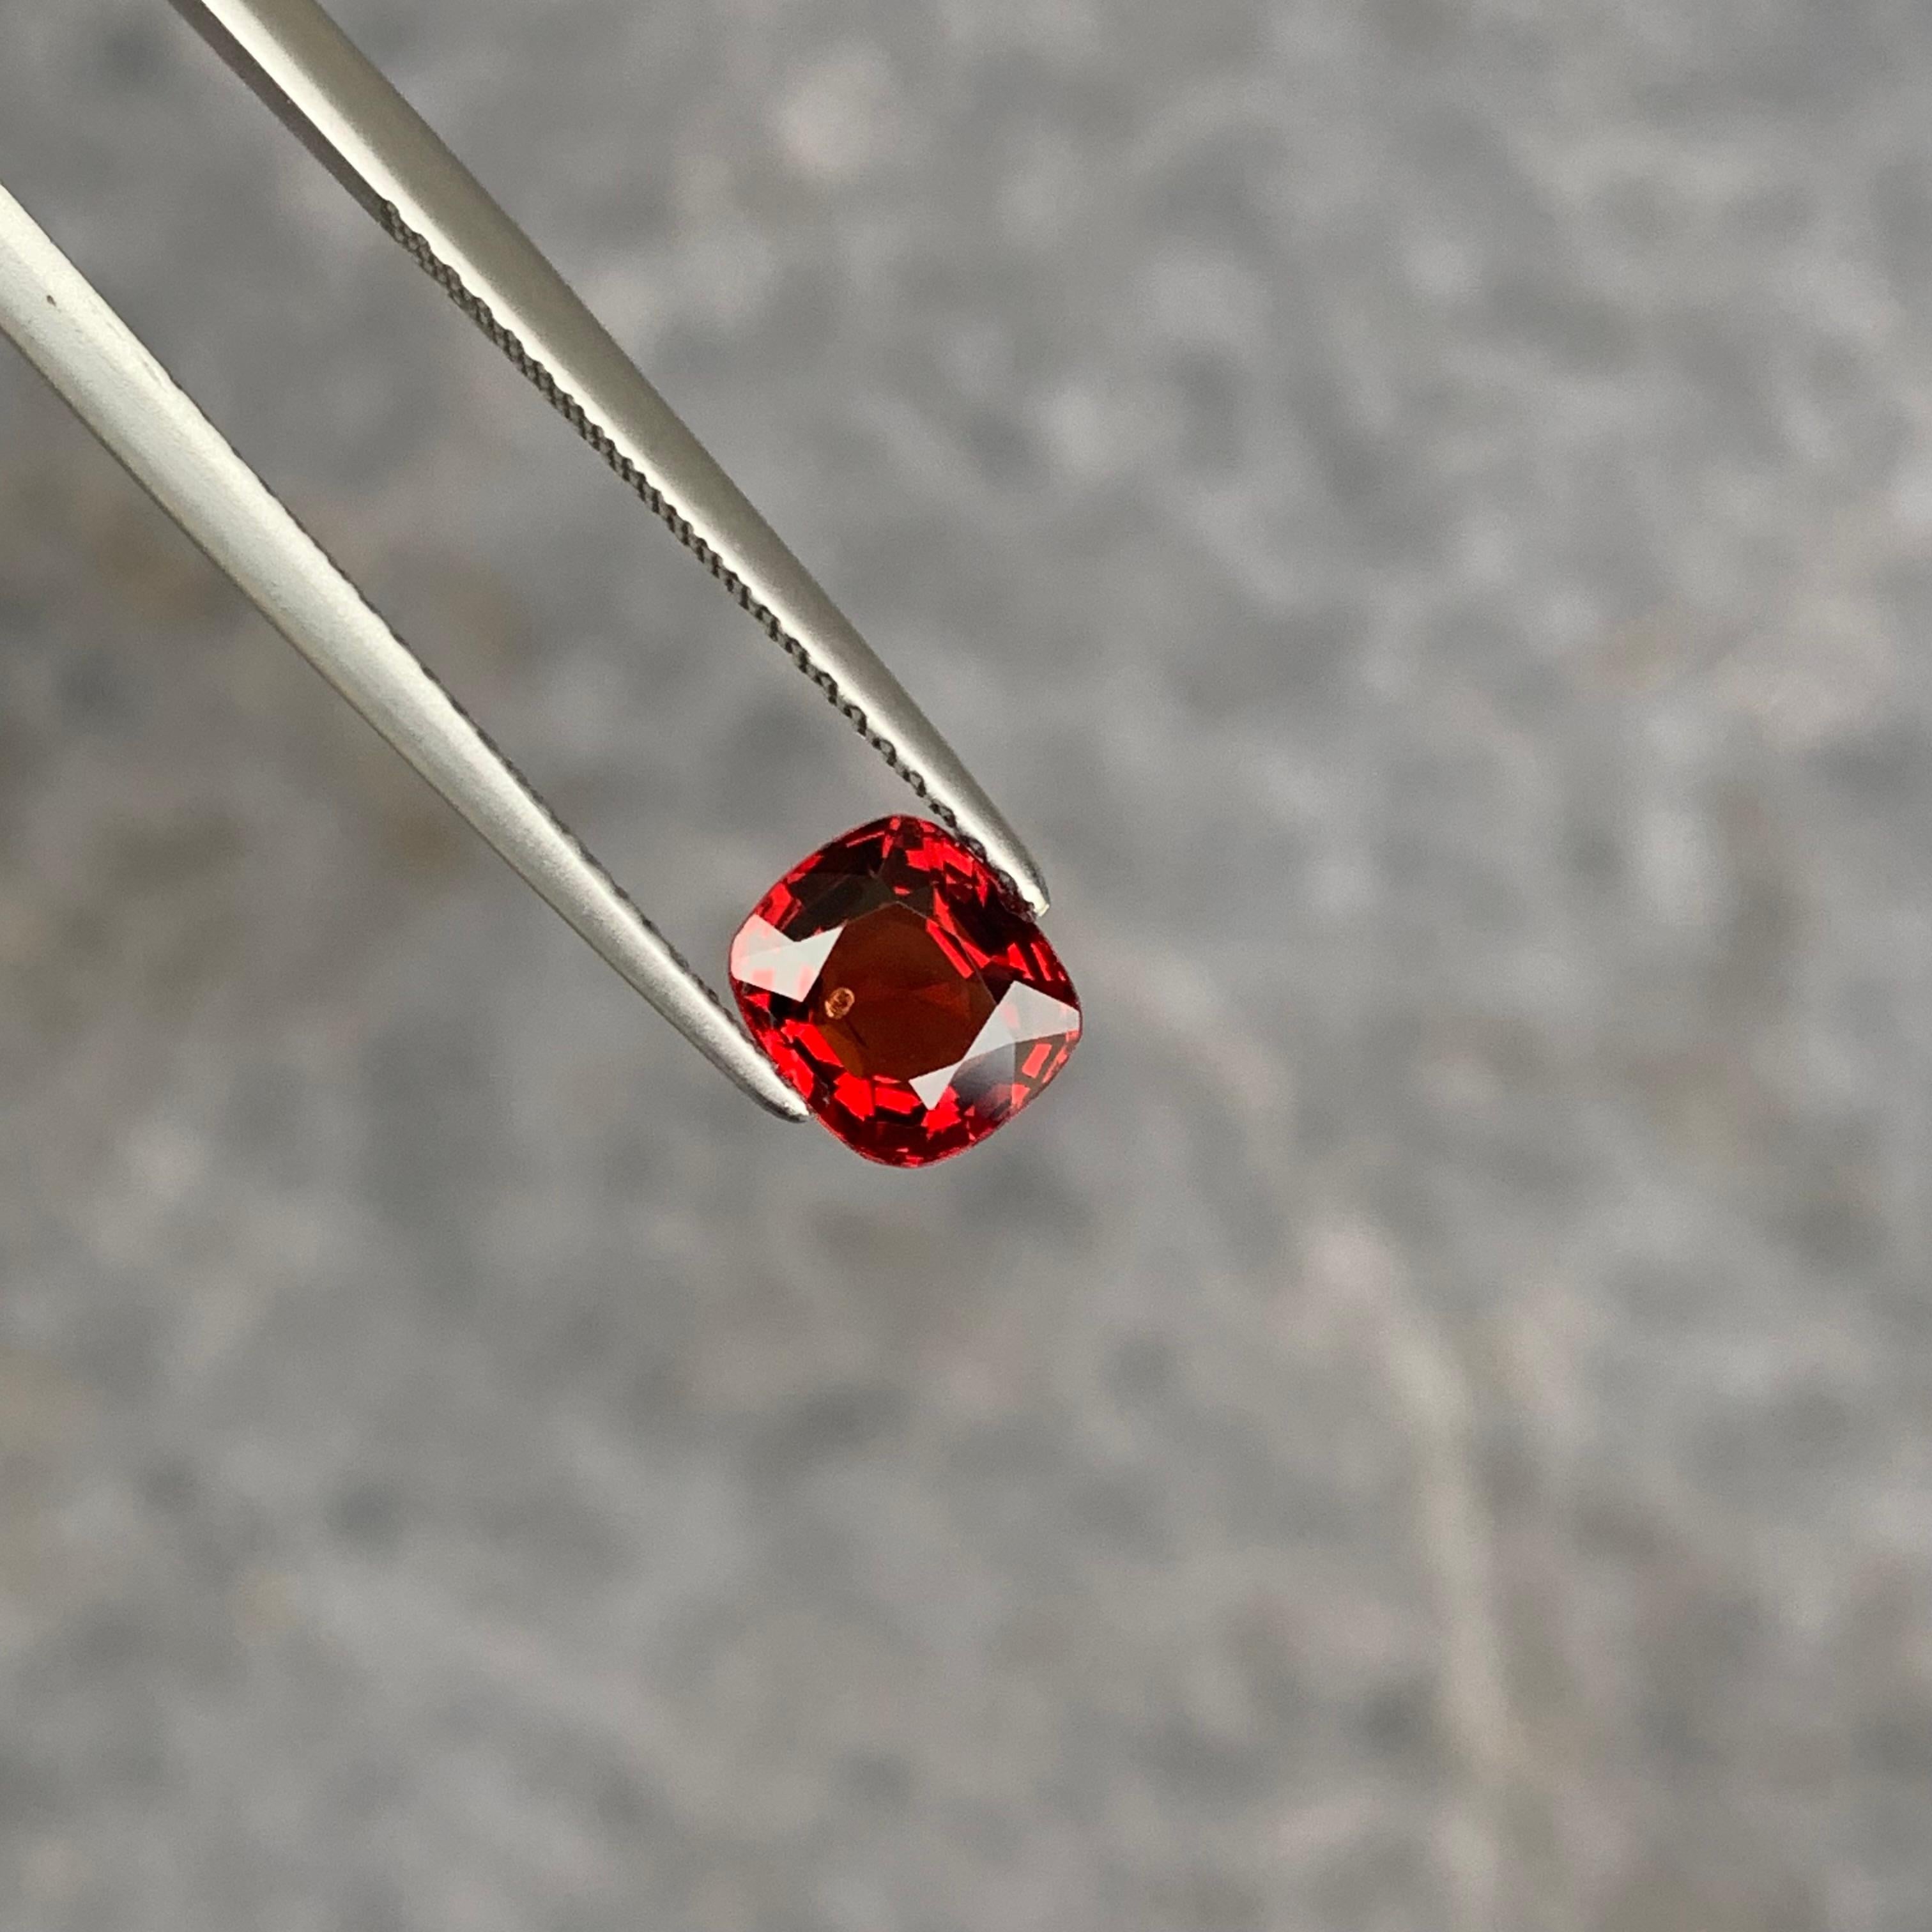 spinel for sale